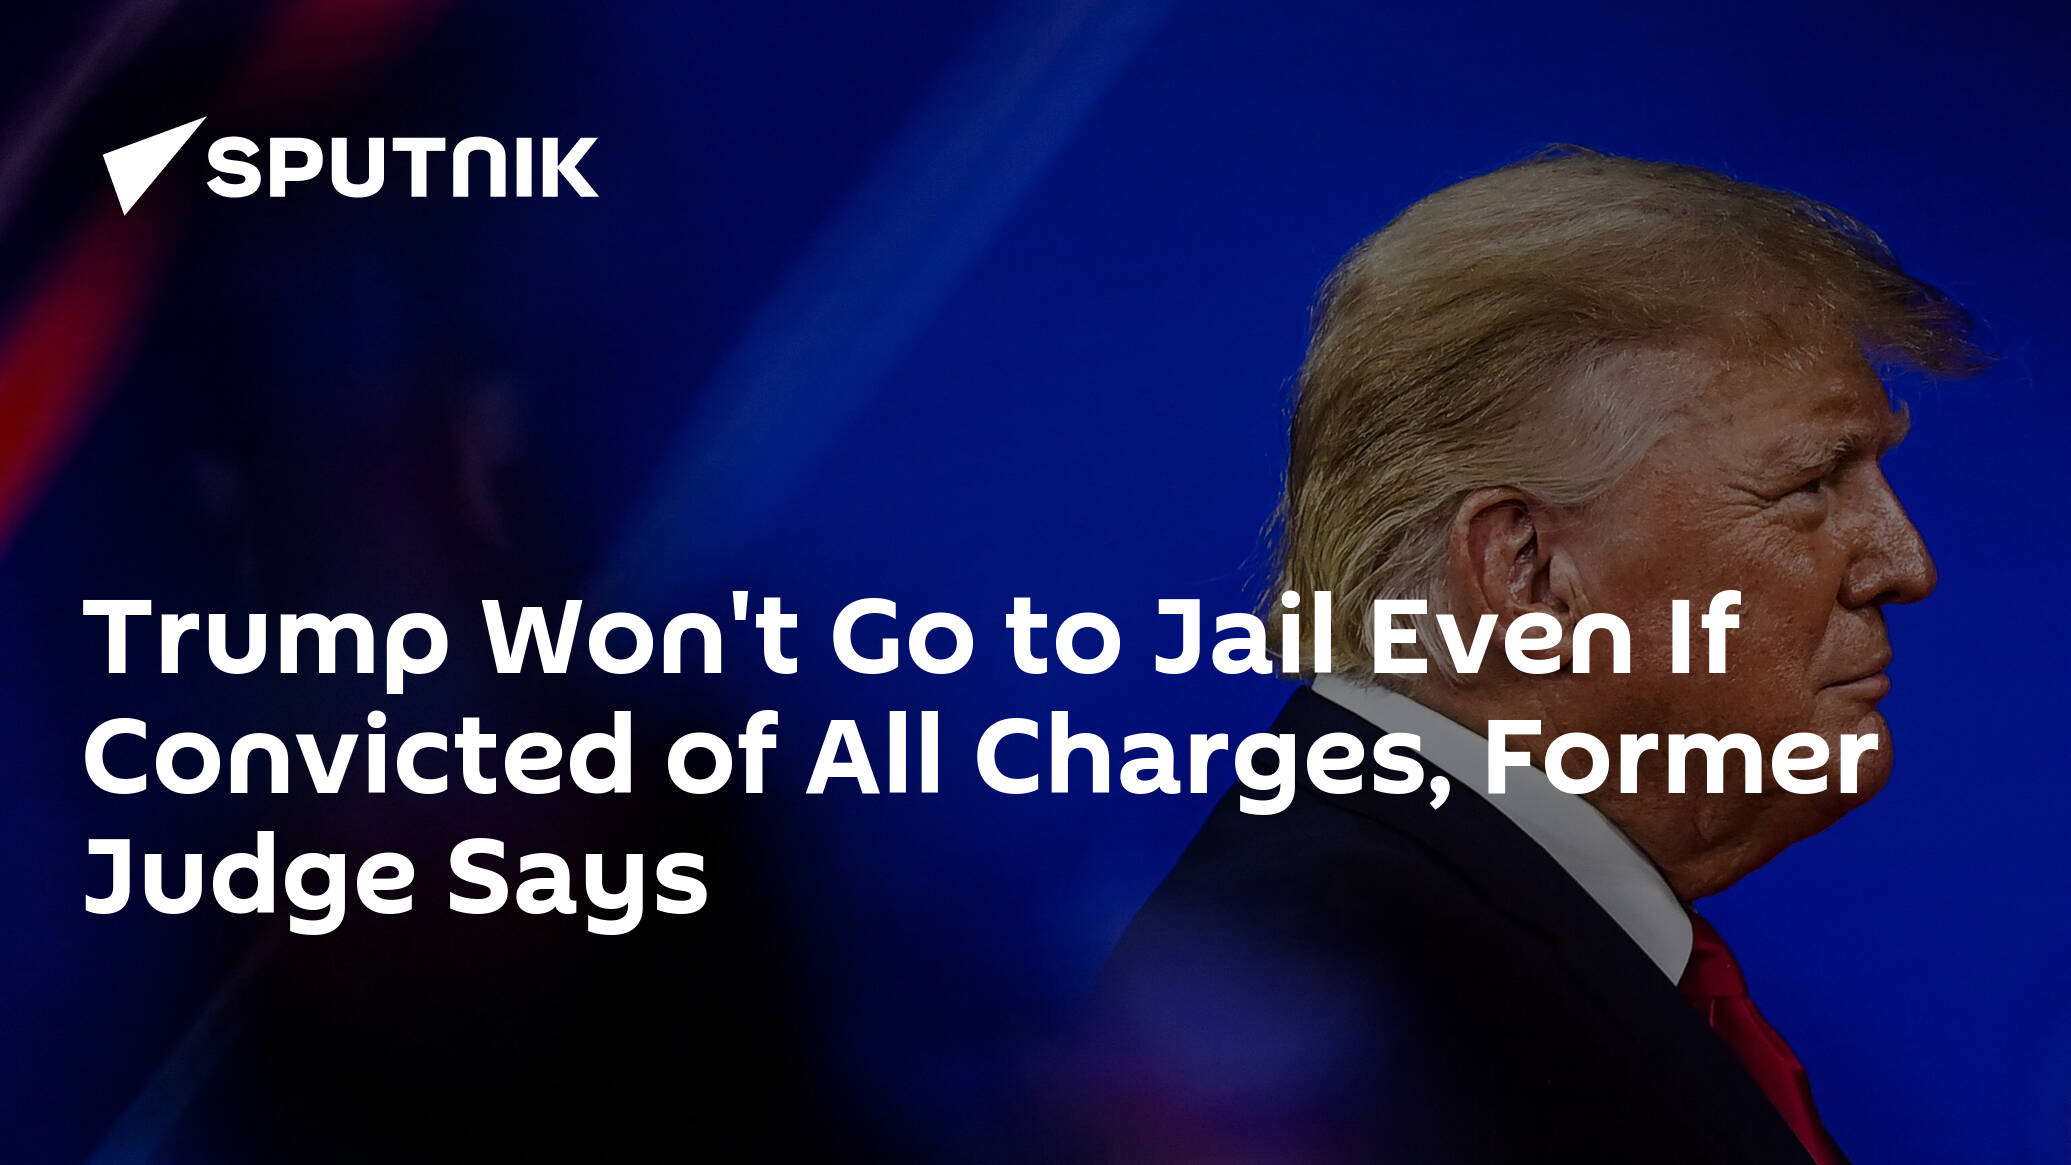 Trump Won't Go to Jail Even If Convicted of All Charges, Former Judge Says